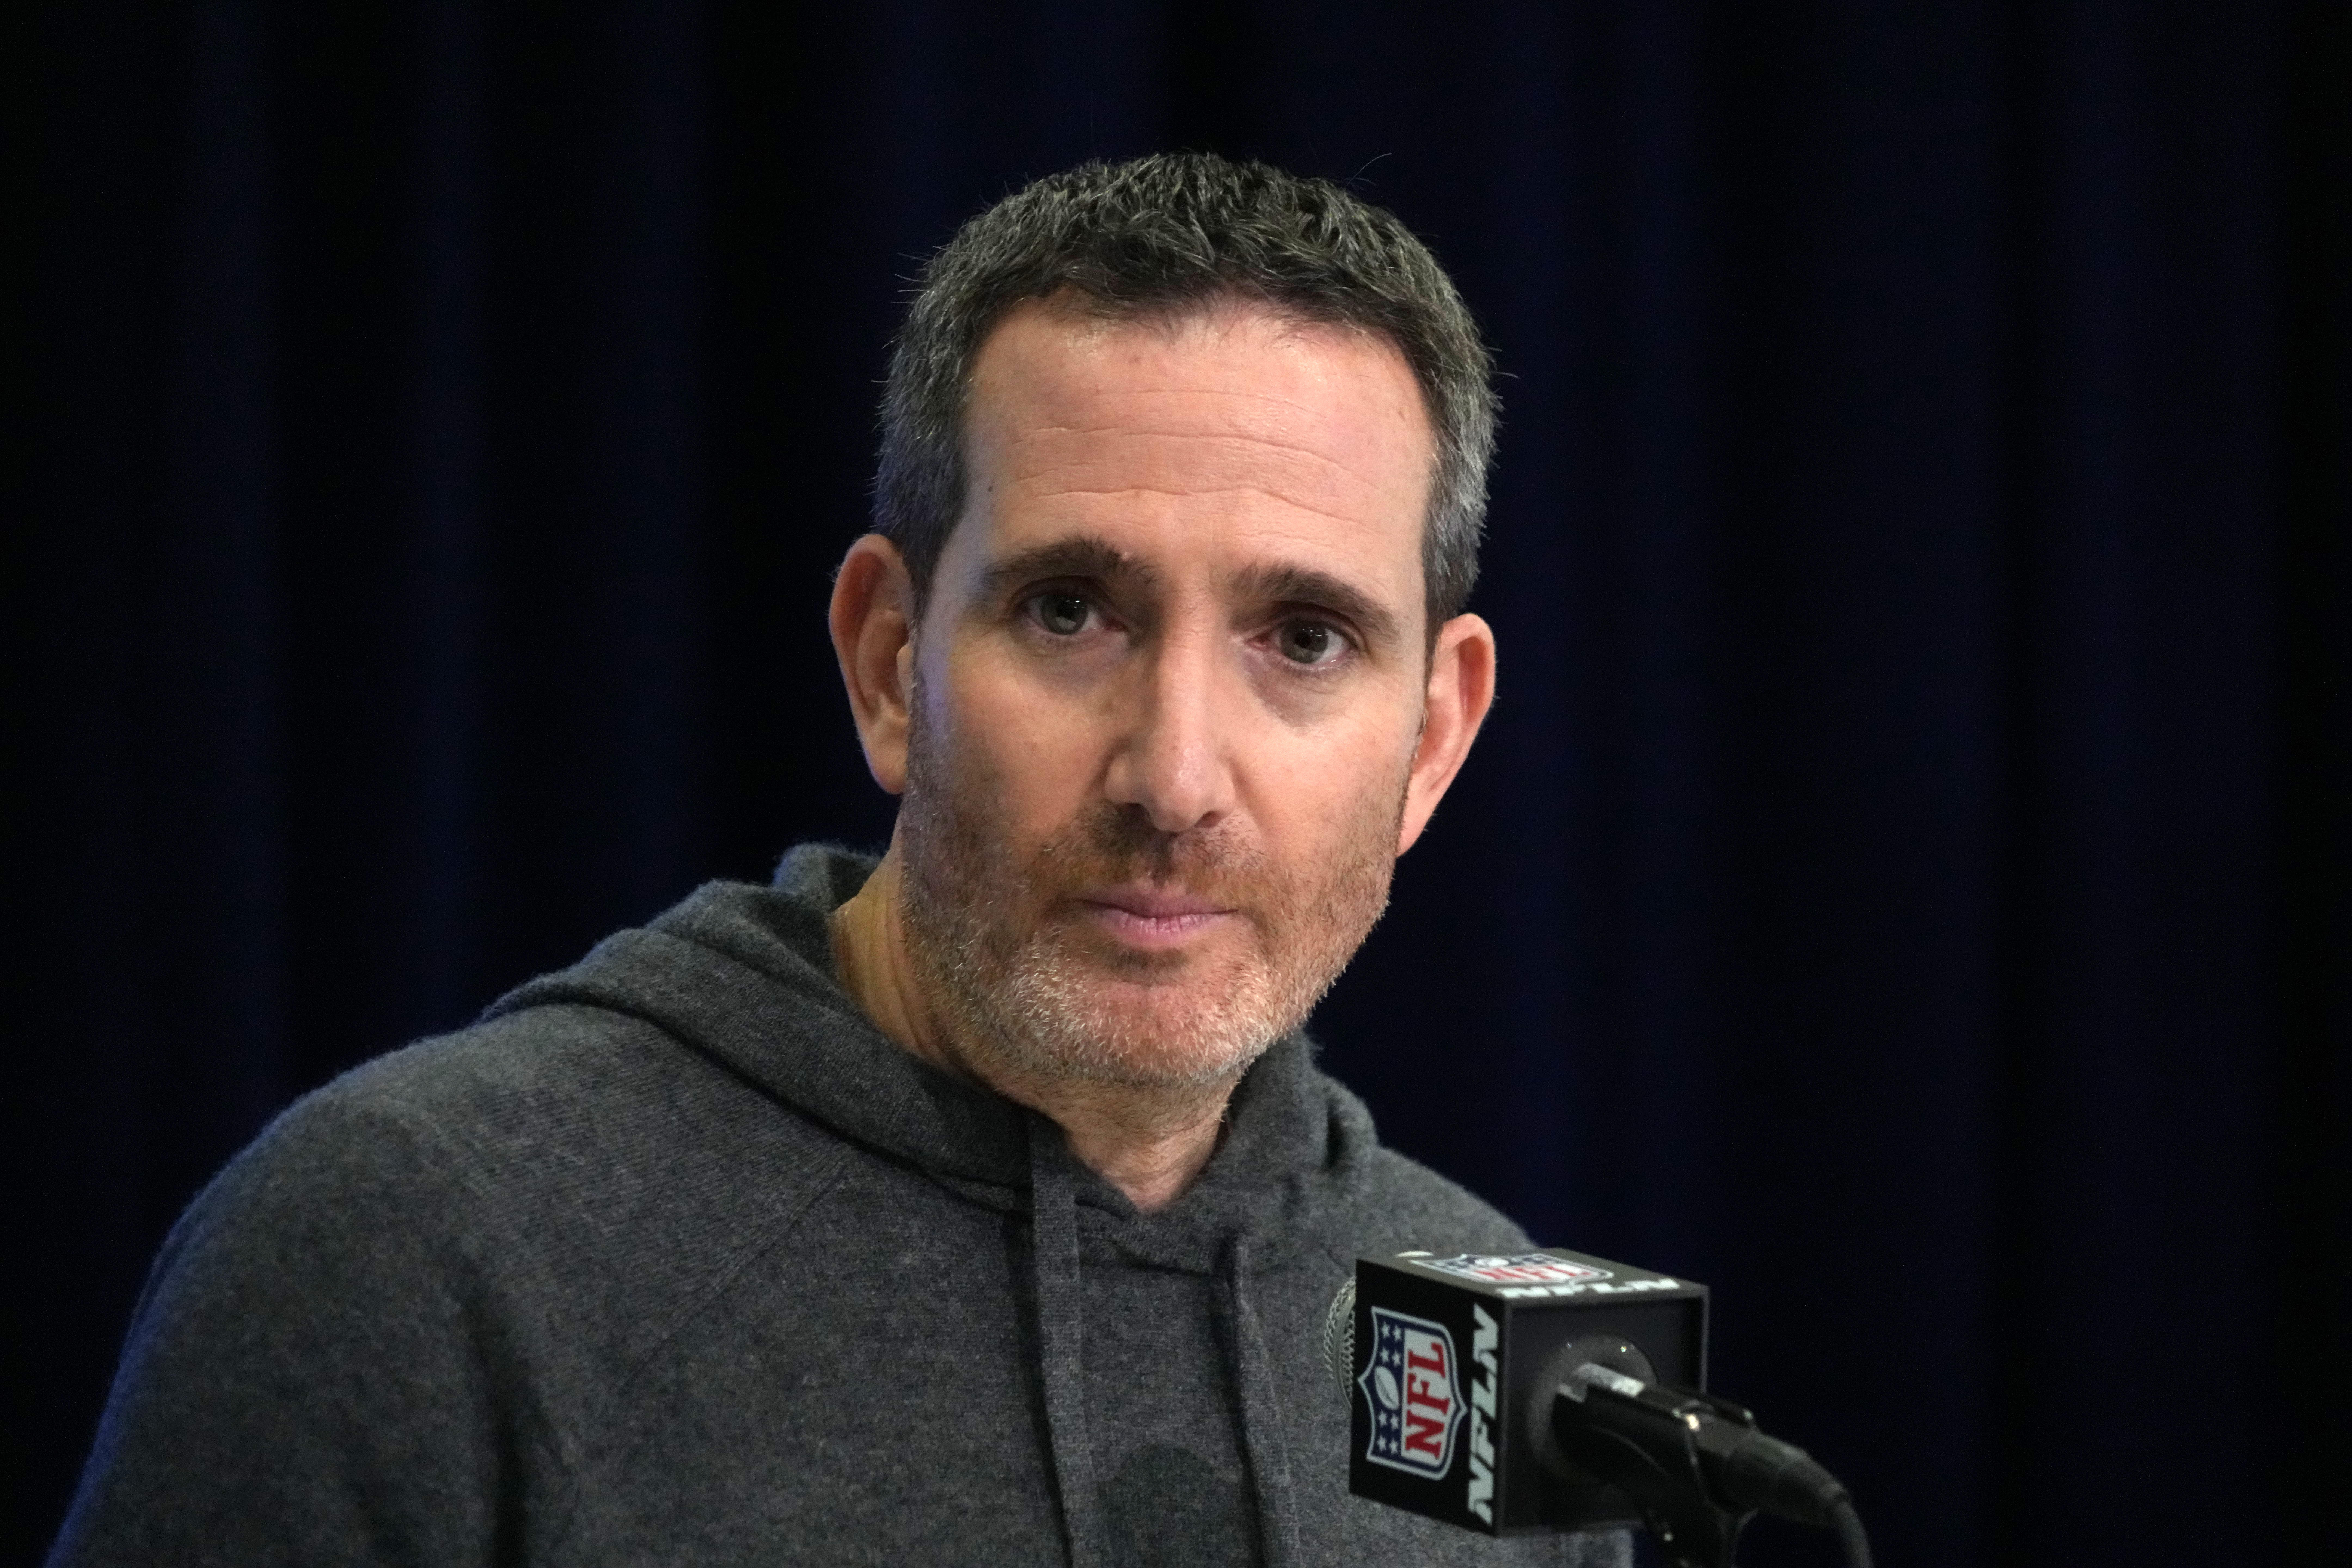 Howie Roseman overseeing operations for the Philadelphia Eagles